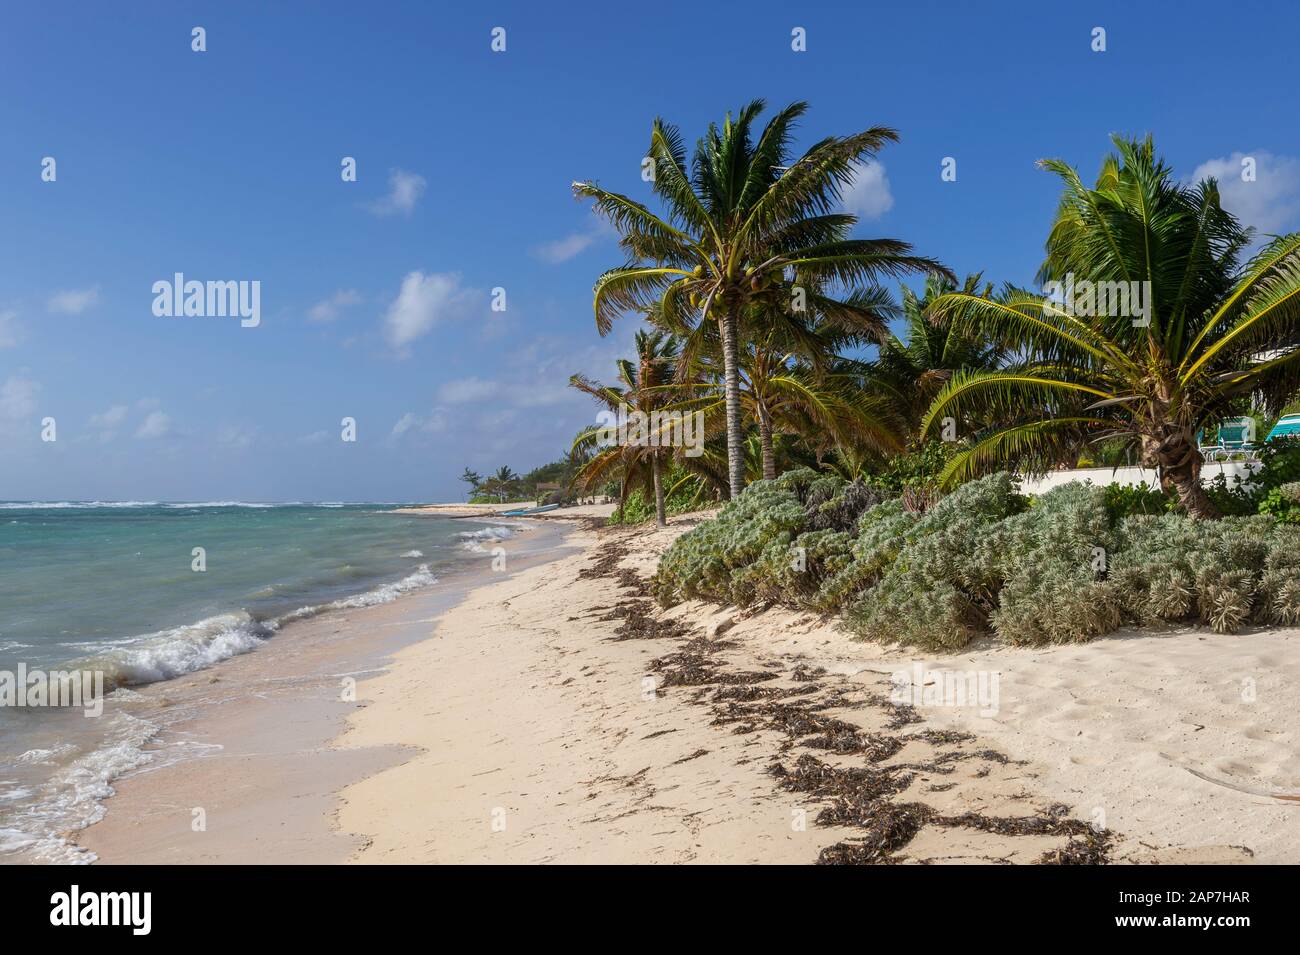 Palm trees and sandy beach, perfect tropical location, Grand Cayman Island Stock Photo